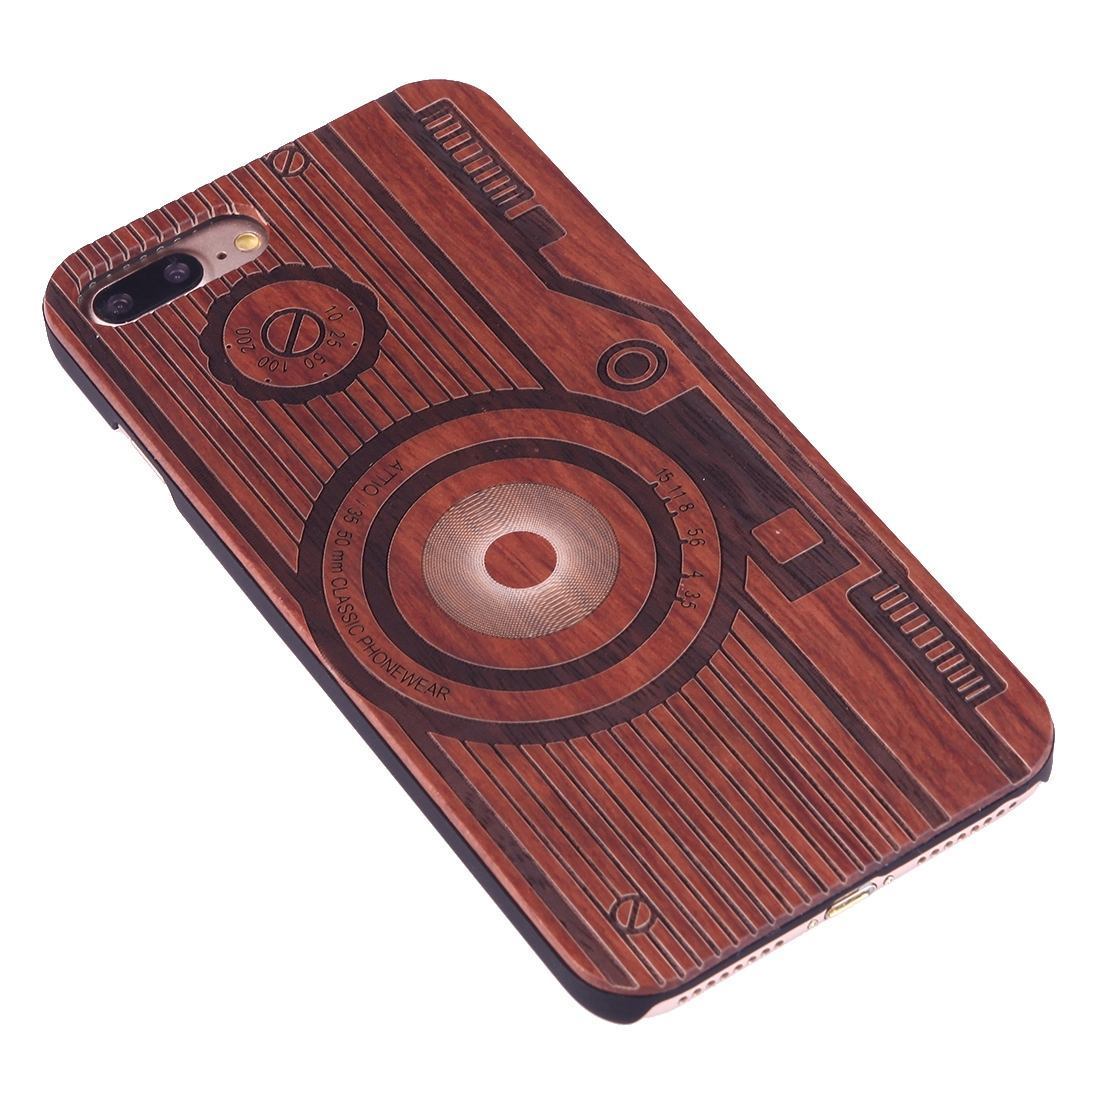 For iPhone 8 PLUS,7 PLUS Case,Rosewood Retro Camera Wooden Protective Cover